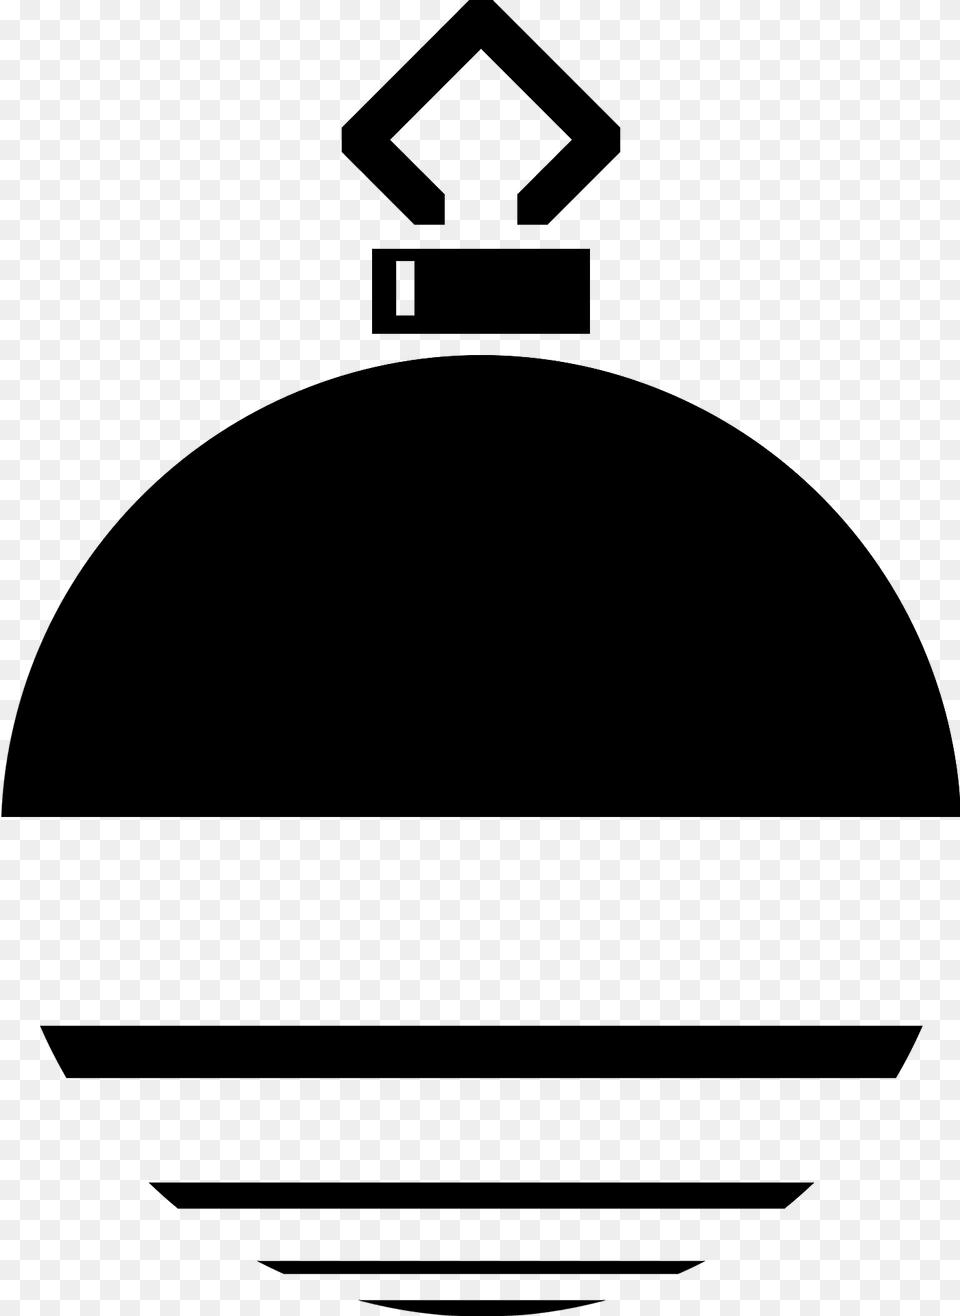 Simple Christmas Ornament Black And White With Stripes Clipart, Ammunition, Bomb, Weapon, Sphere Png Image